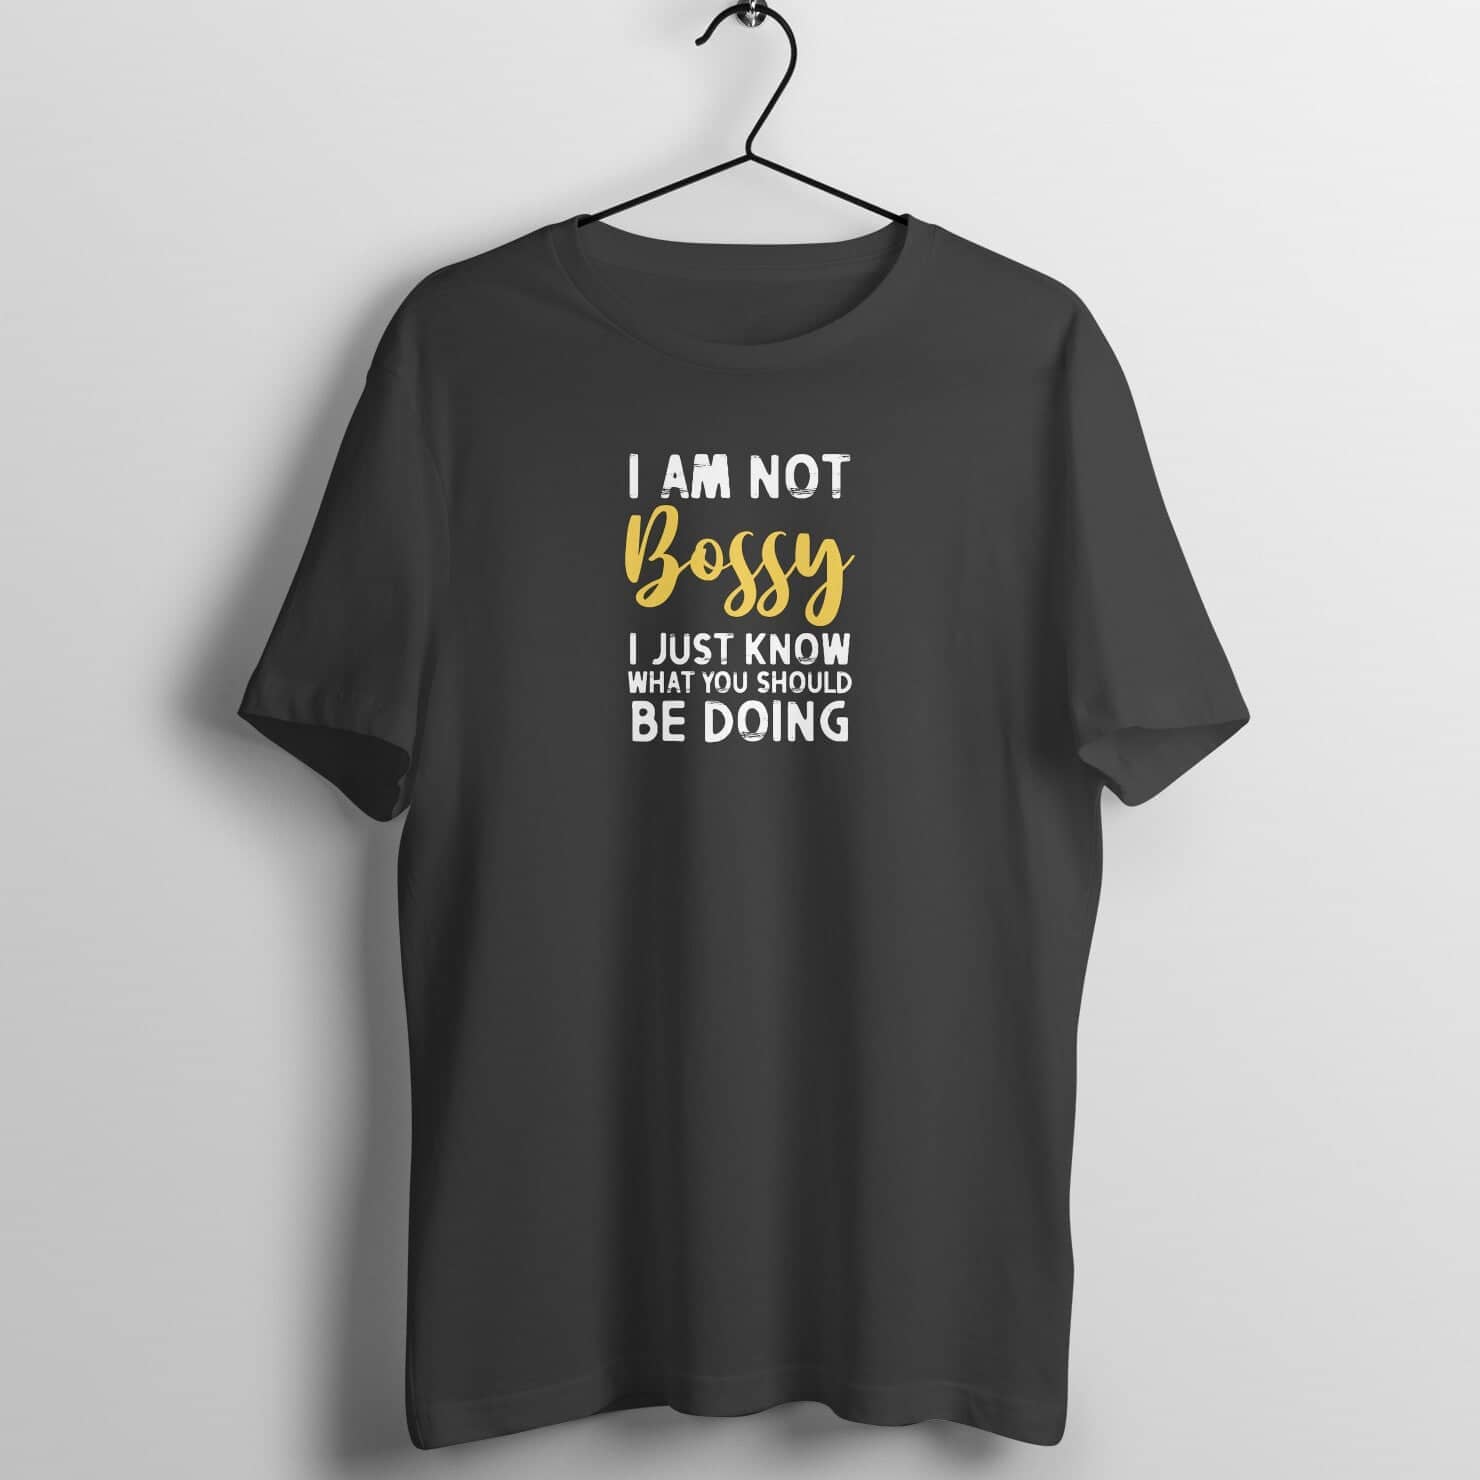 I am Not Bossy I Just Know What You Should Be Doing Exclusive Black T Shirt for Men and Women Shirts & Tops Printrove Black S 